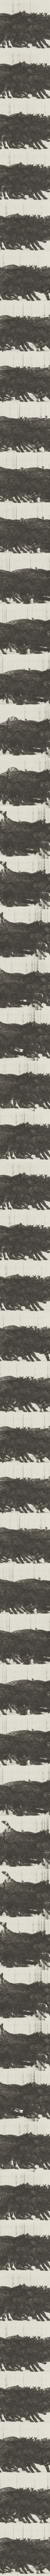 Cat Trotting, Changing To A Gallop (Darken-15-0.039-72)